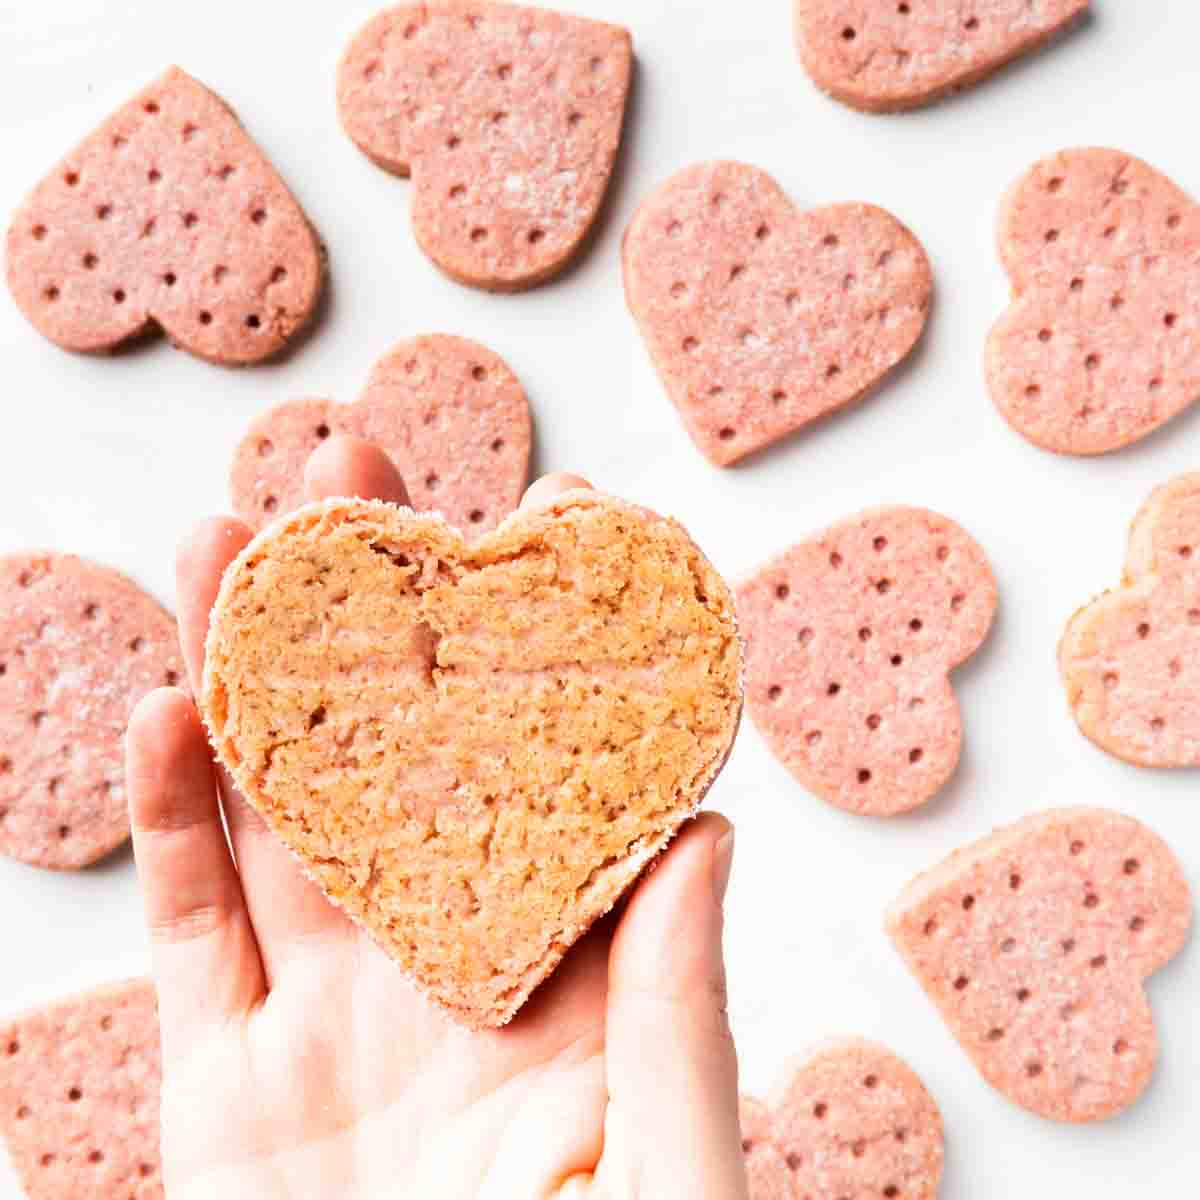 Showing the bottom of a heart shaped cookie with a barely golden coloring.